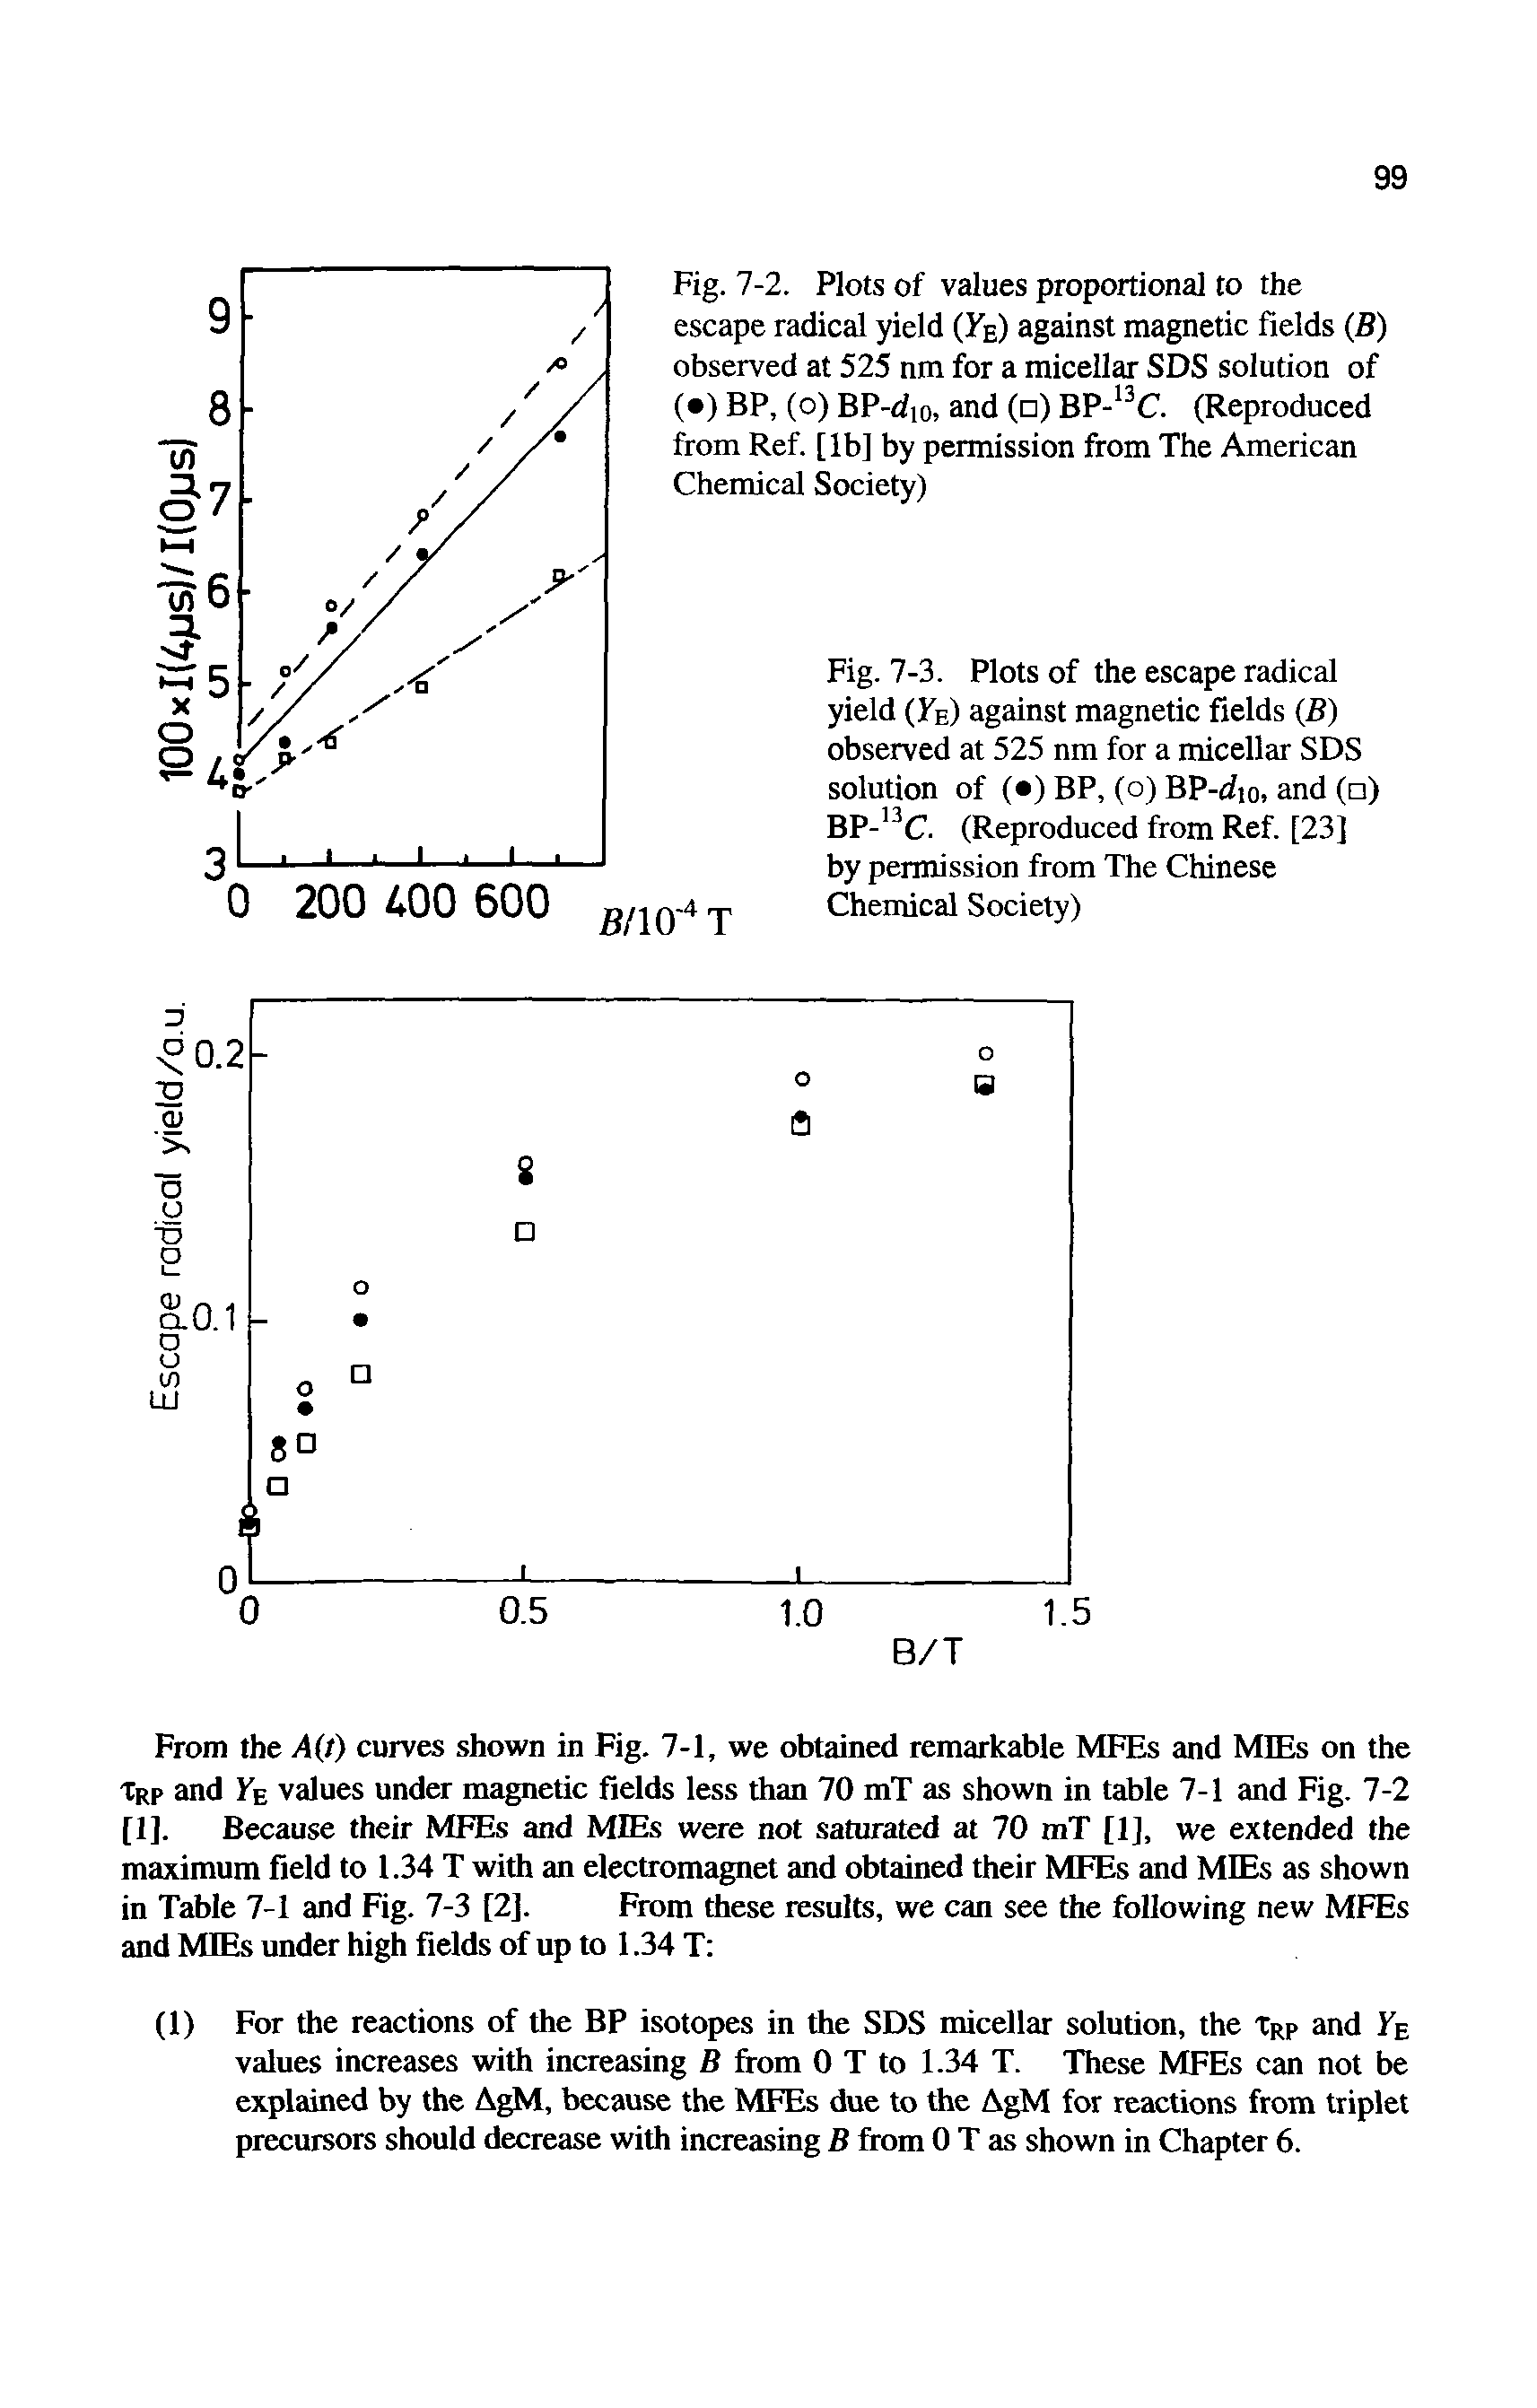 Fig. 7-2. Plots of values proportional to the escape radical yield (Fe) against magnetic fields (S) observed at 525 nm for a micellar SDS solution of ( ) BP, (o) BP-dio, and ( ) BP- C. (Reproduced from Ref. [lb] by permission from The American Chemical Society)...